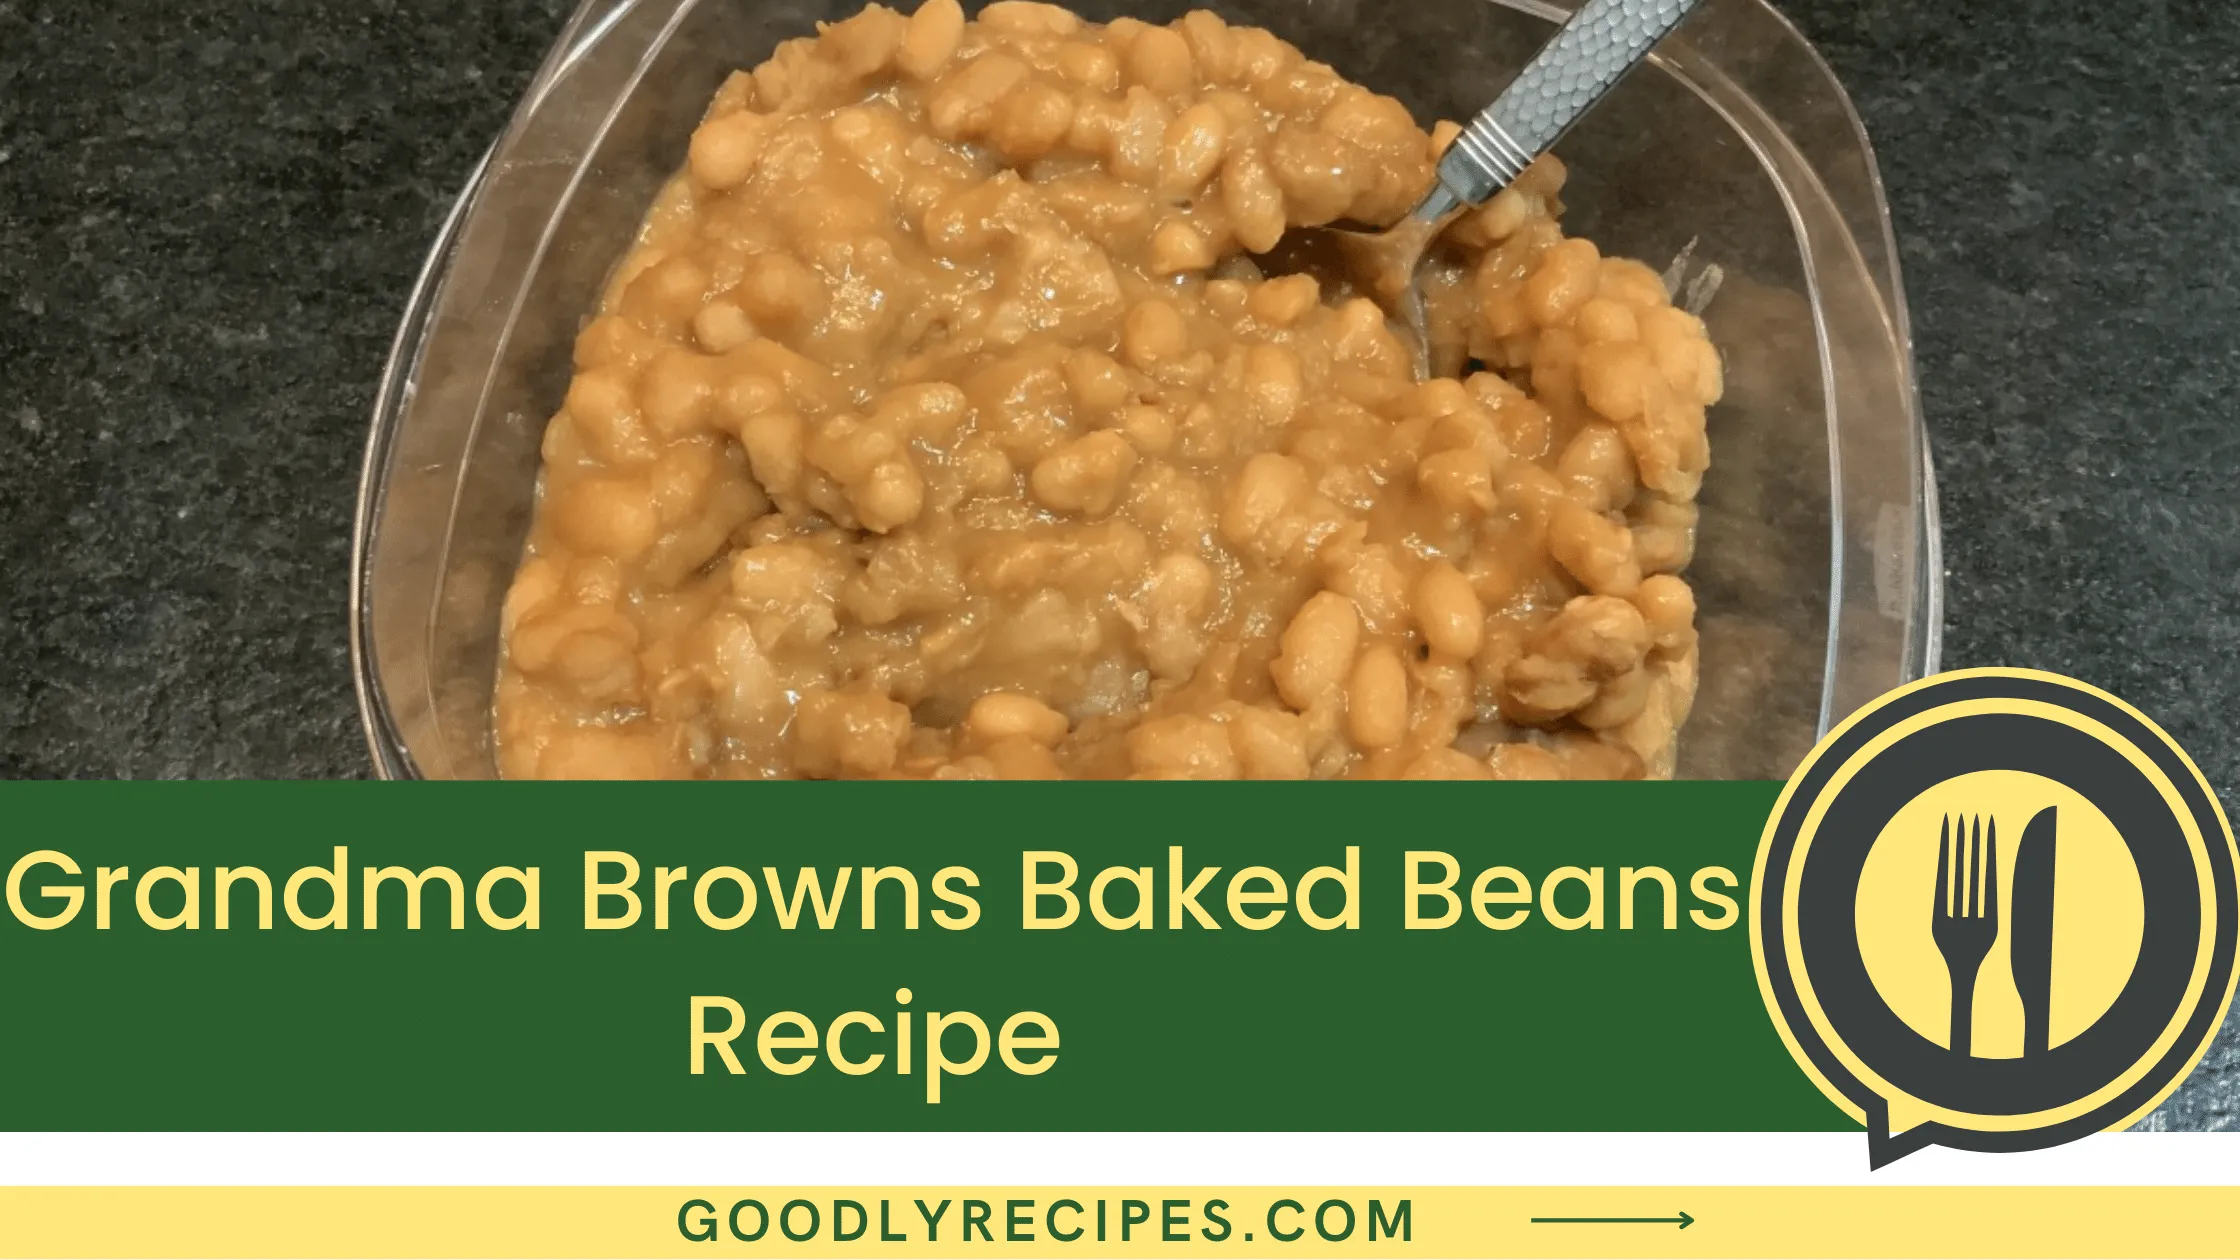 What Is Grandma Browns Baked Beans?